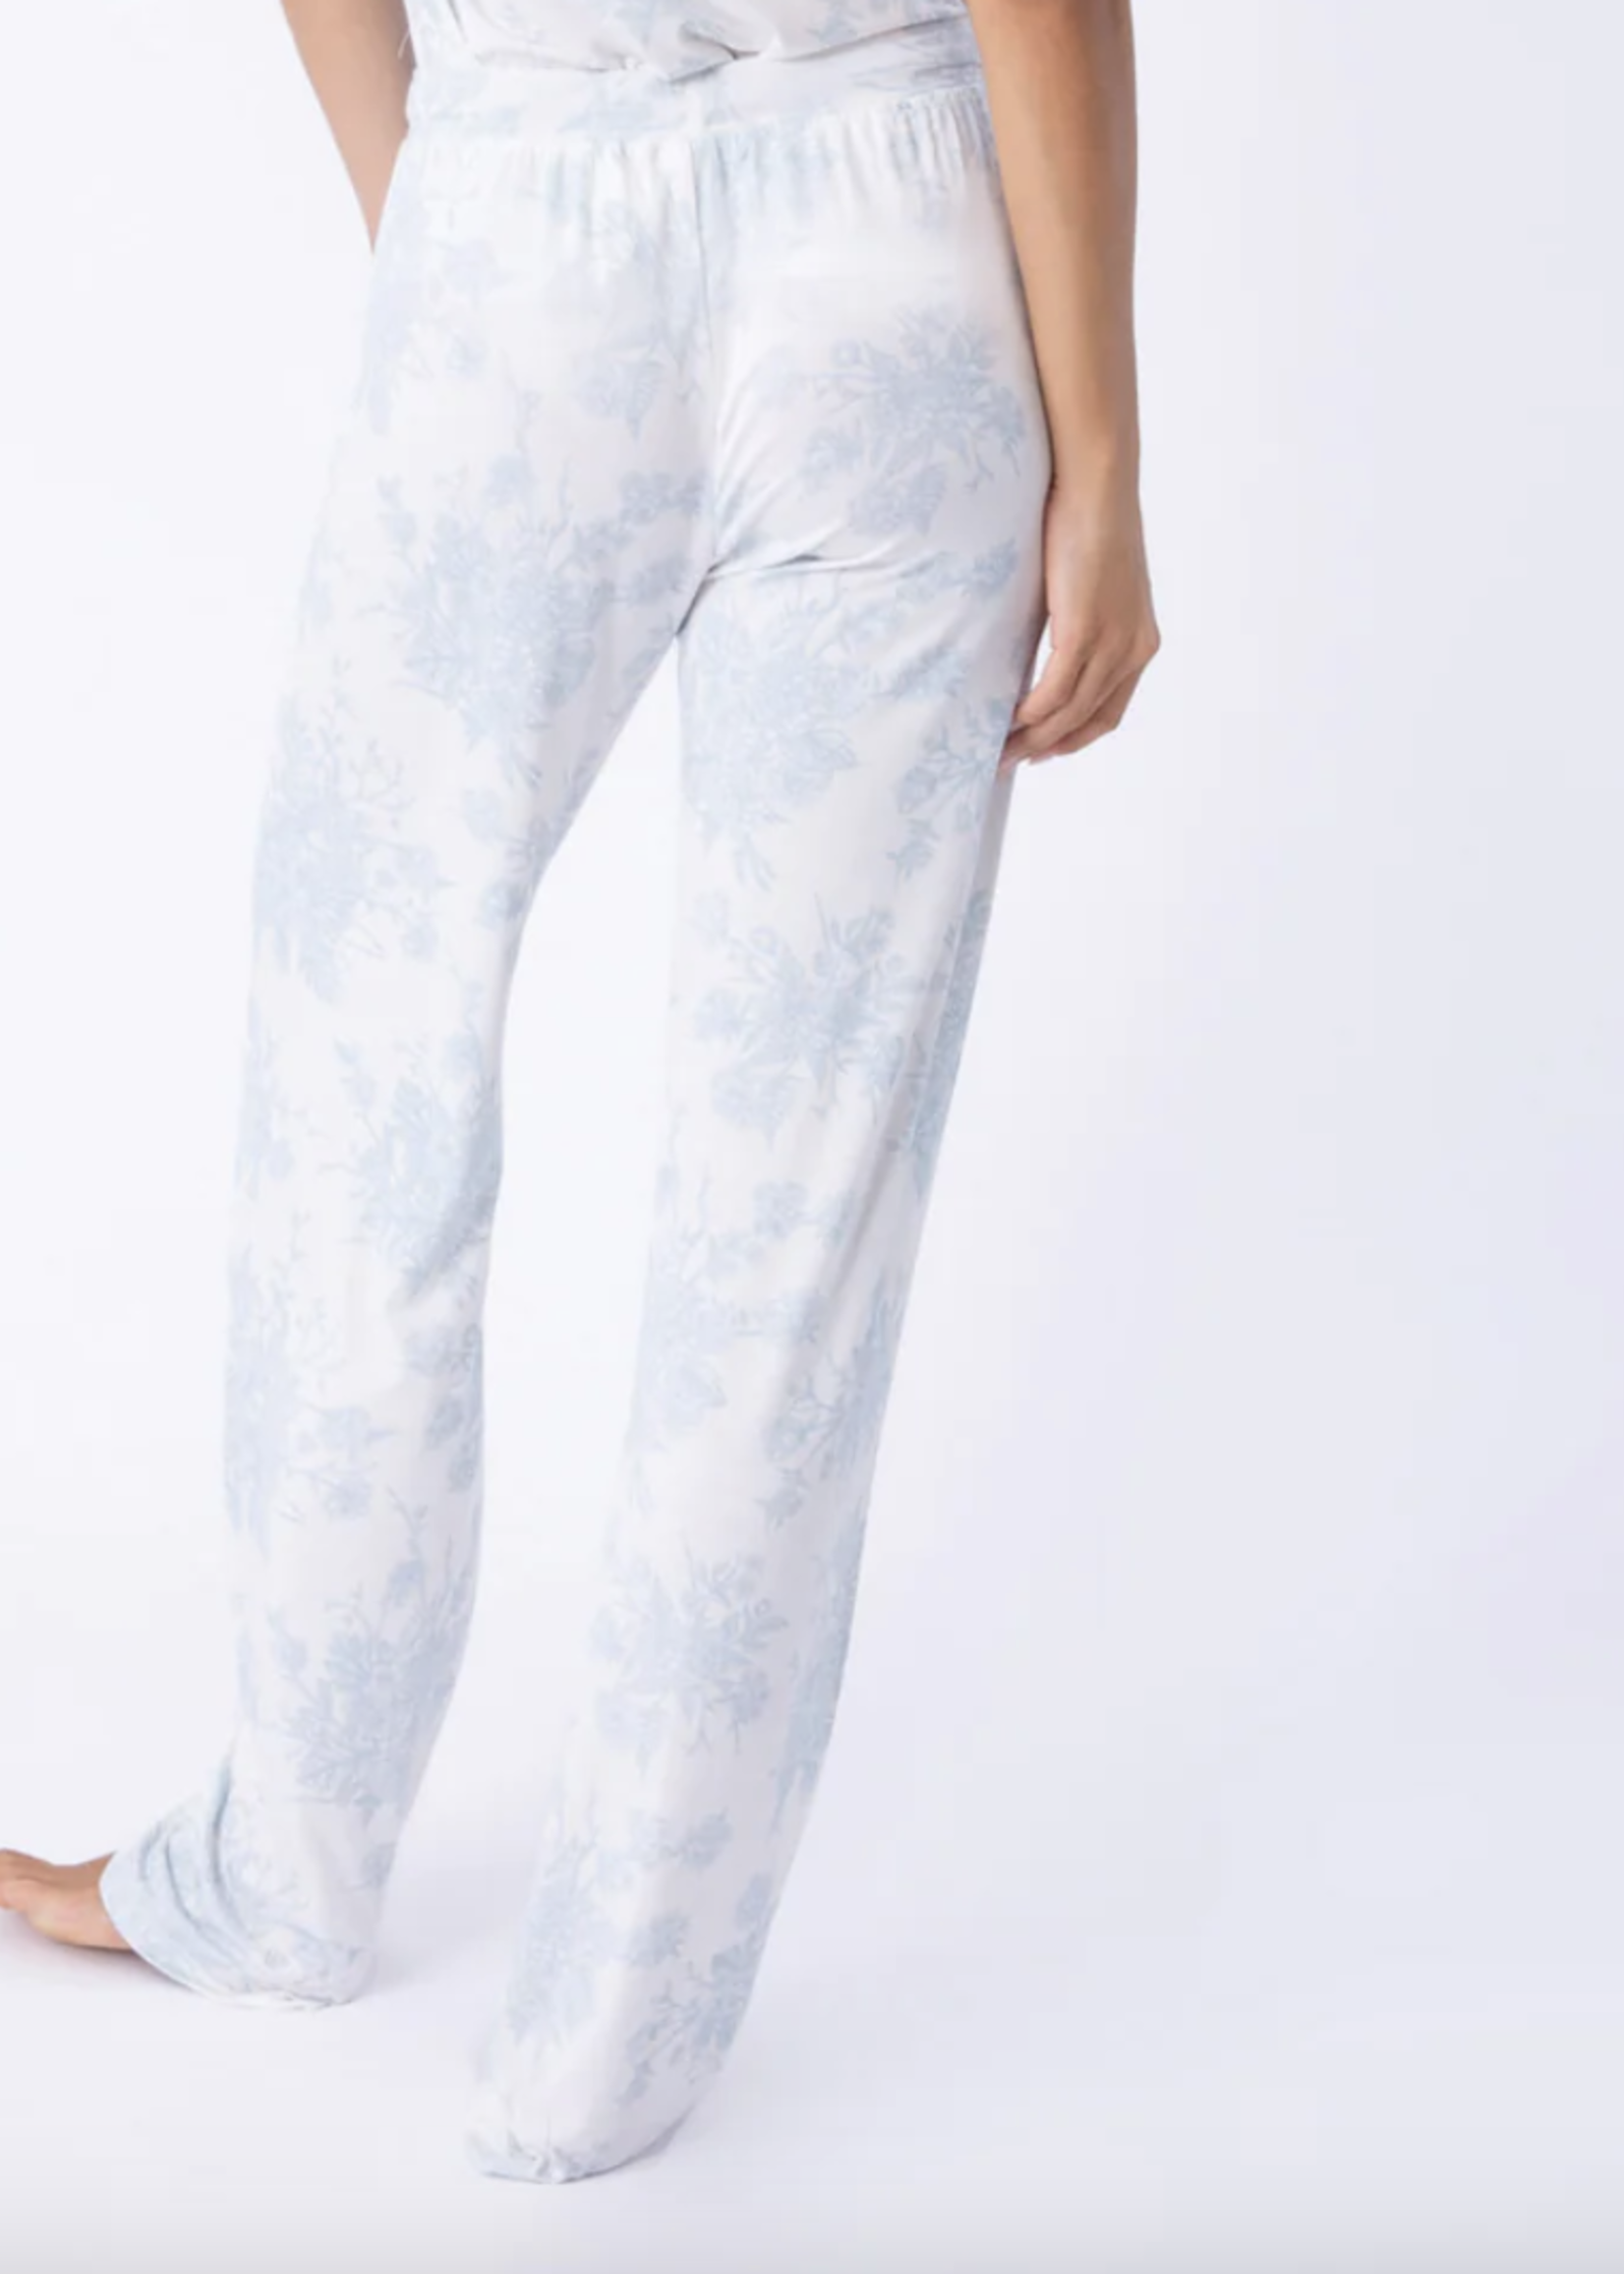 P.J. SALVAGE FOREVER LOVED PANT